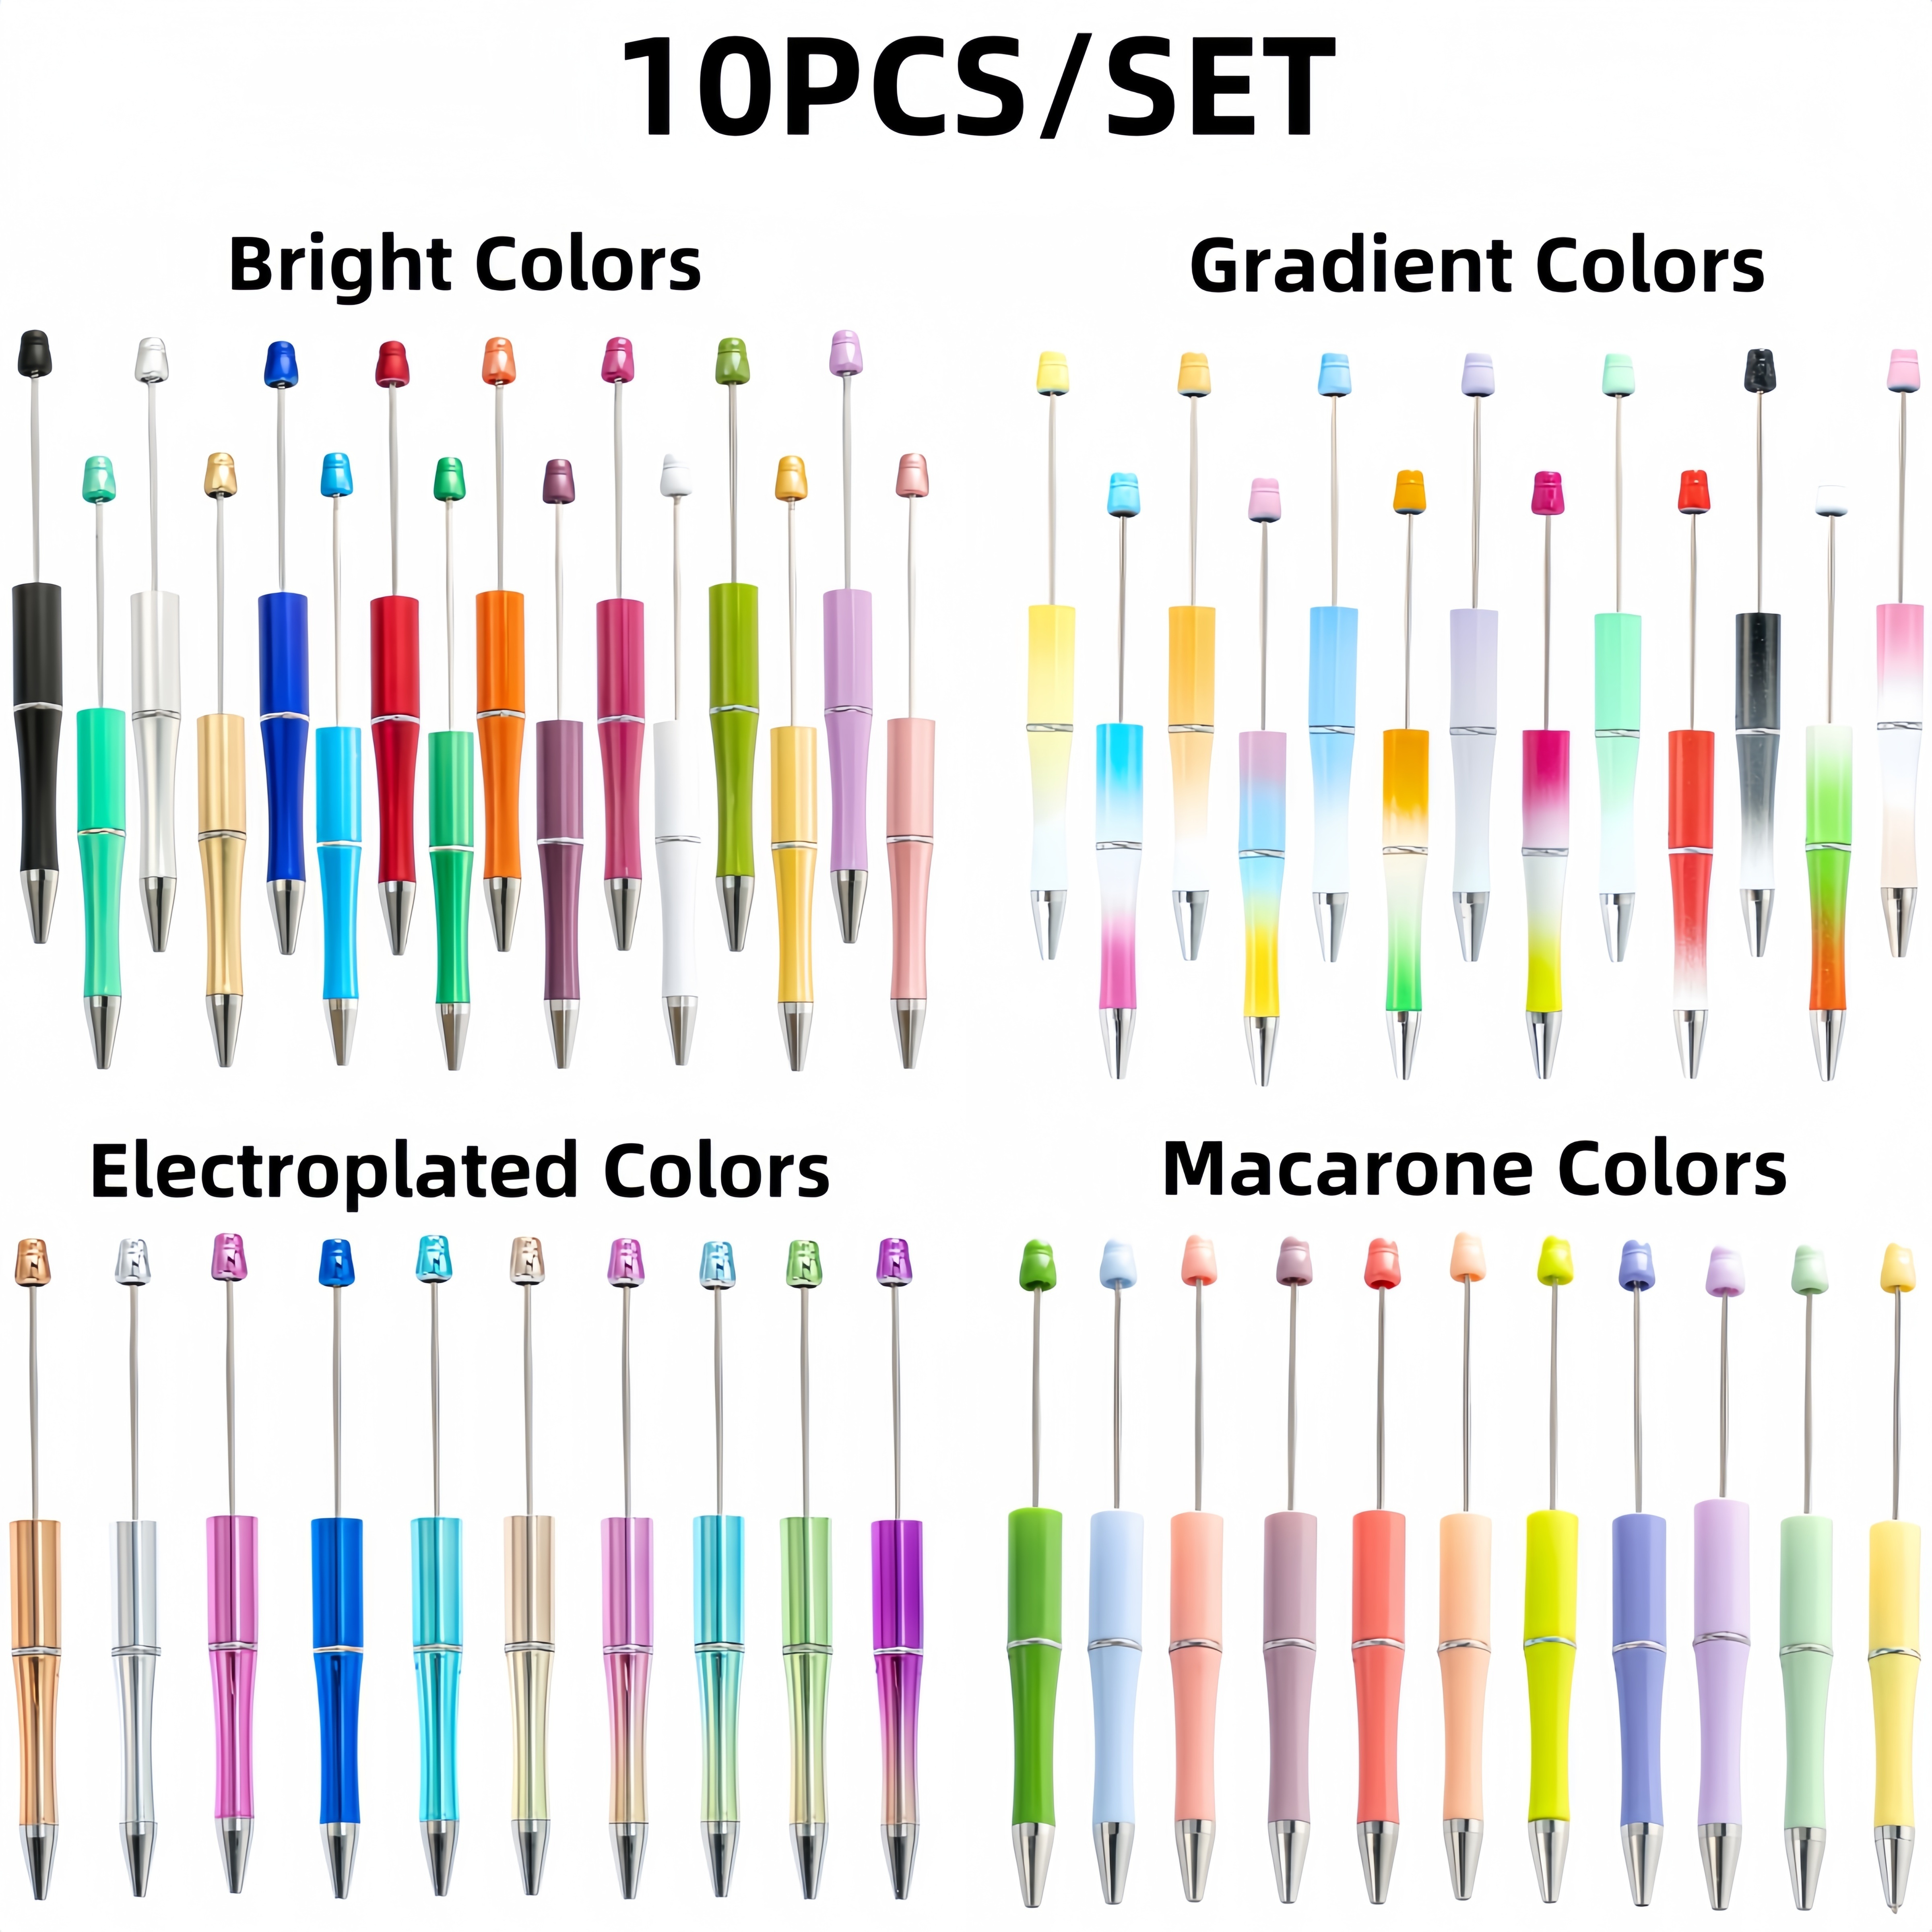 

10pcs Random Color Bright Colors Series Plastic Bead Pens - Perfect For Diy With Wood, Acrylic, Or Silicone Beads - Ideal For Office, School, Or As A Gift For Friends And Family